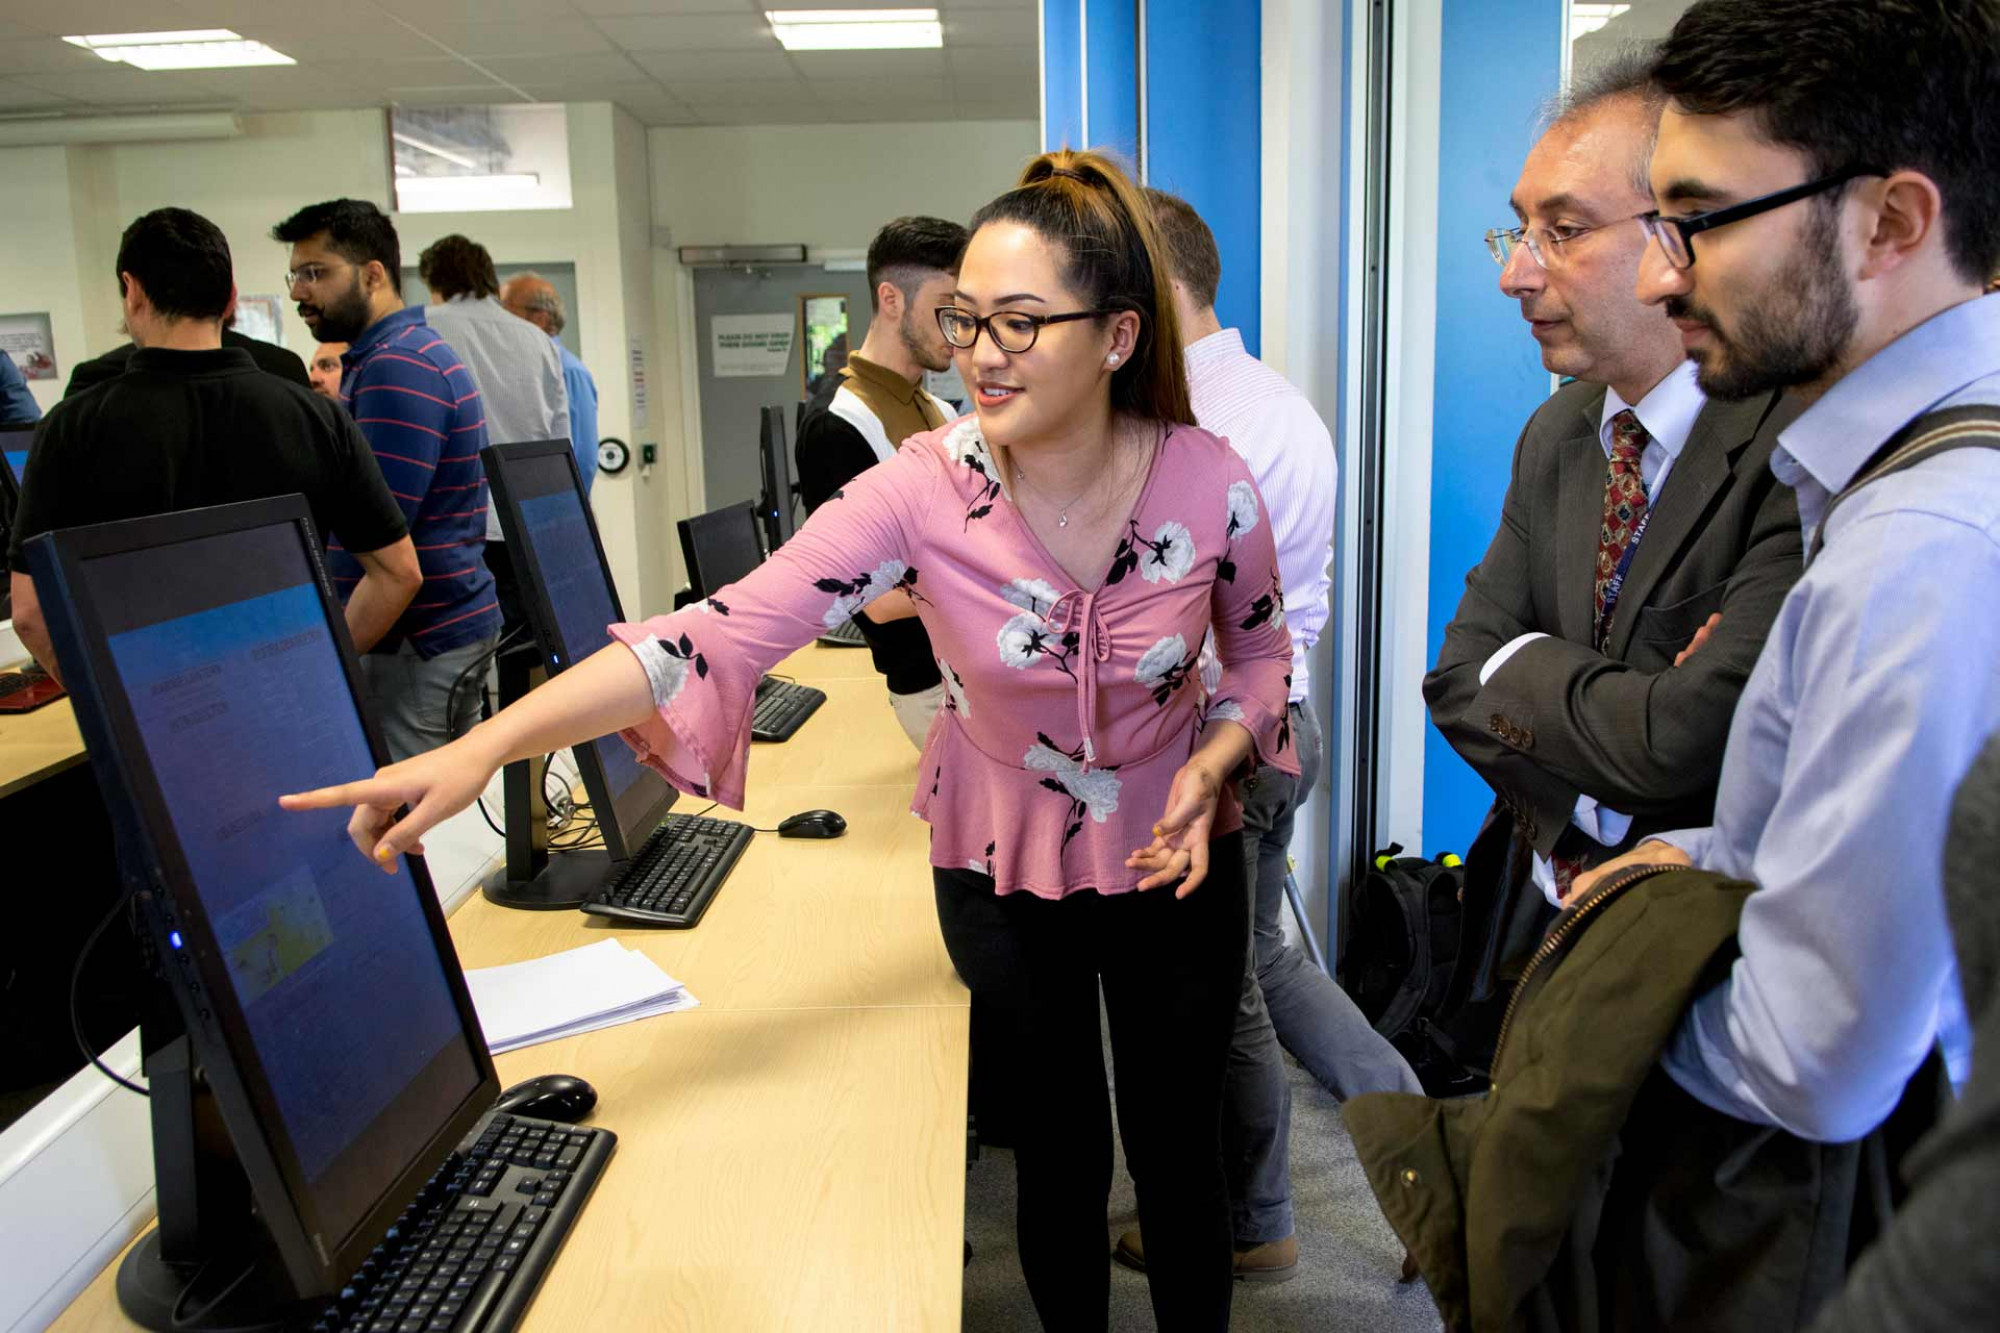 Three people look at a computer screen at the Careers and Employability Fair